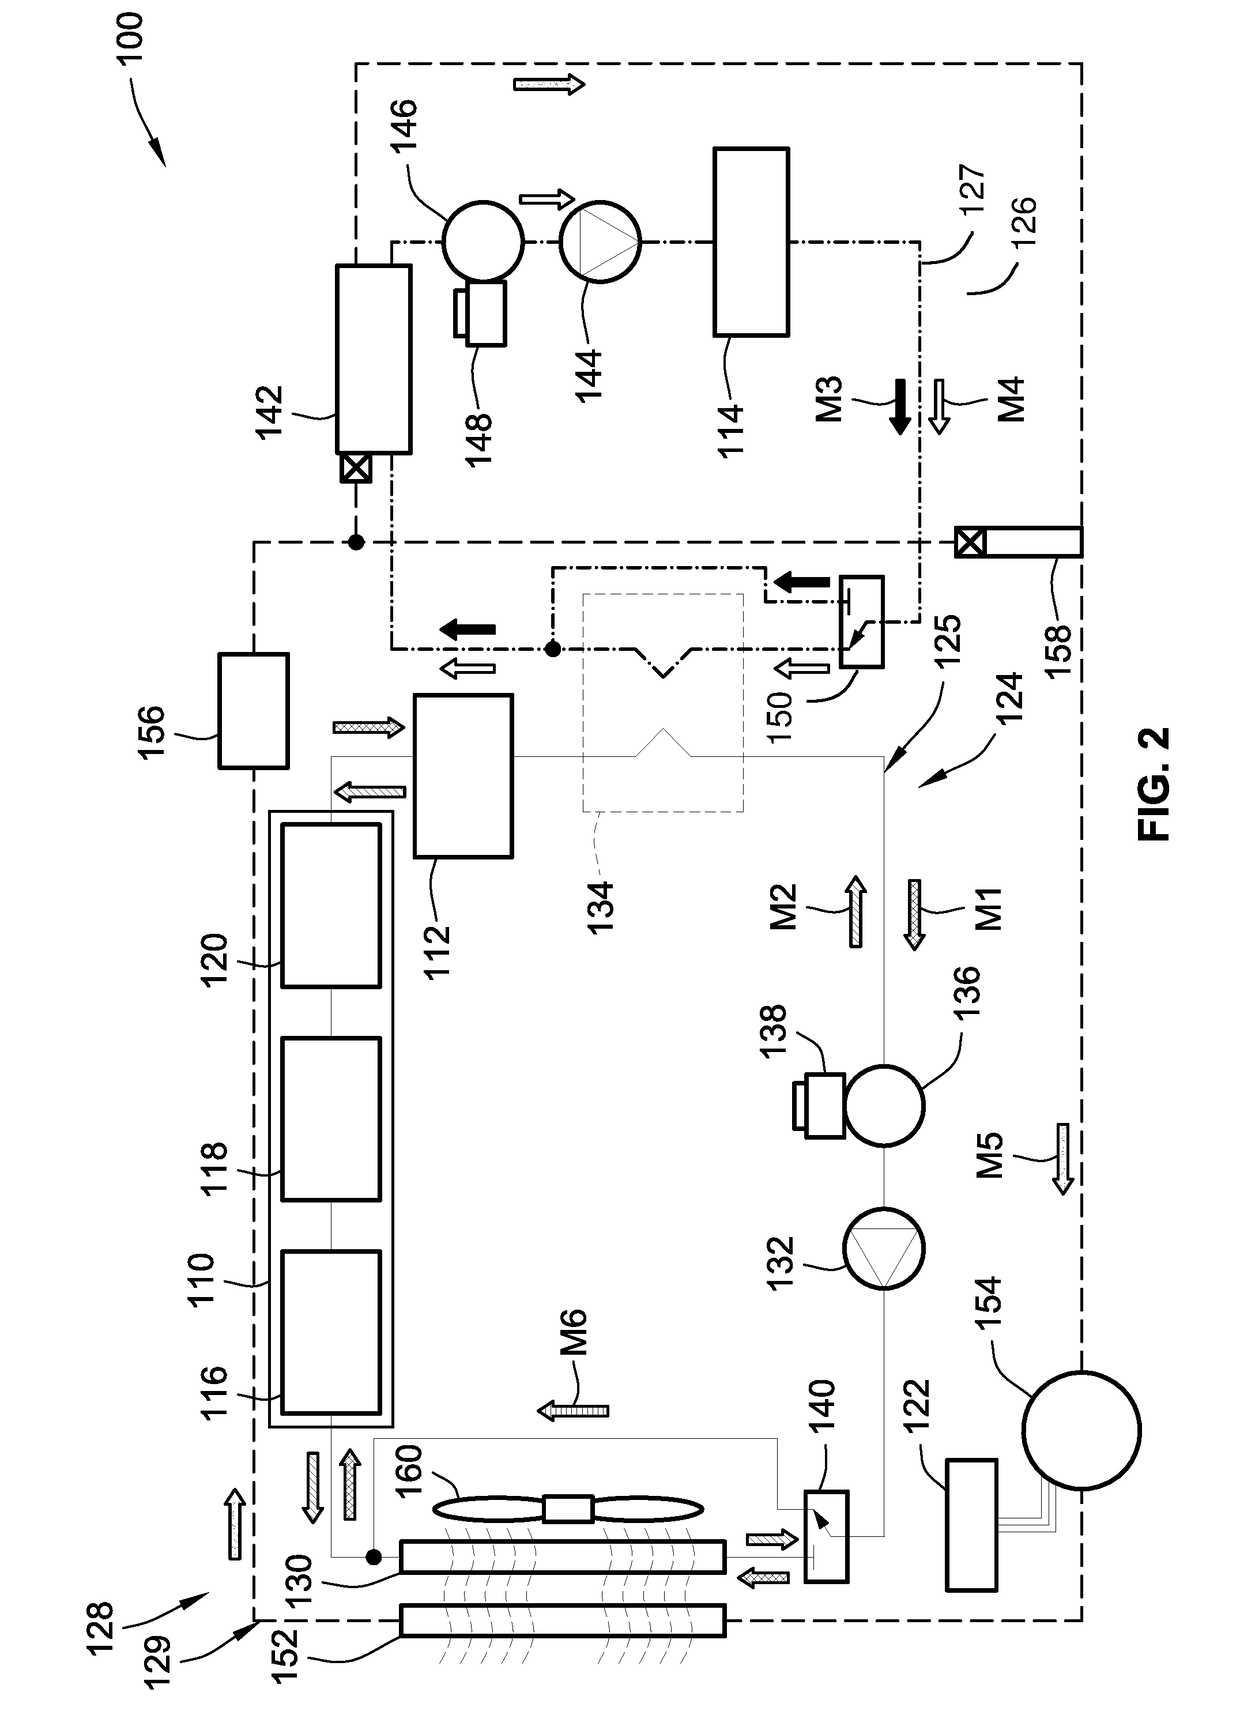 Joint active thermal management system and control logic for hybrid and electric vehicles